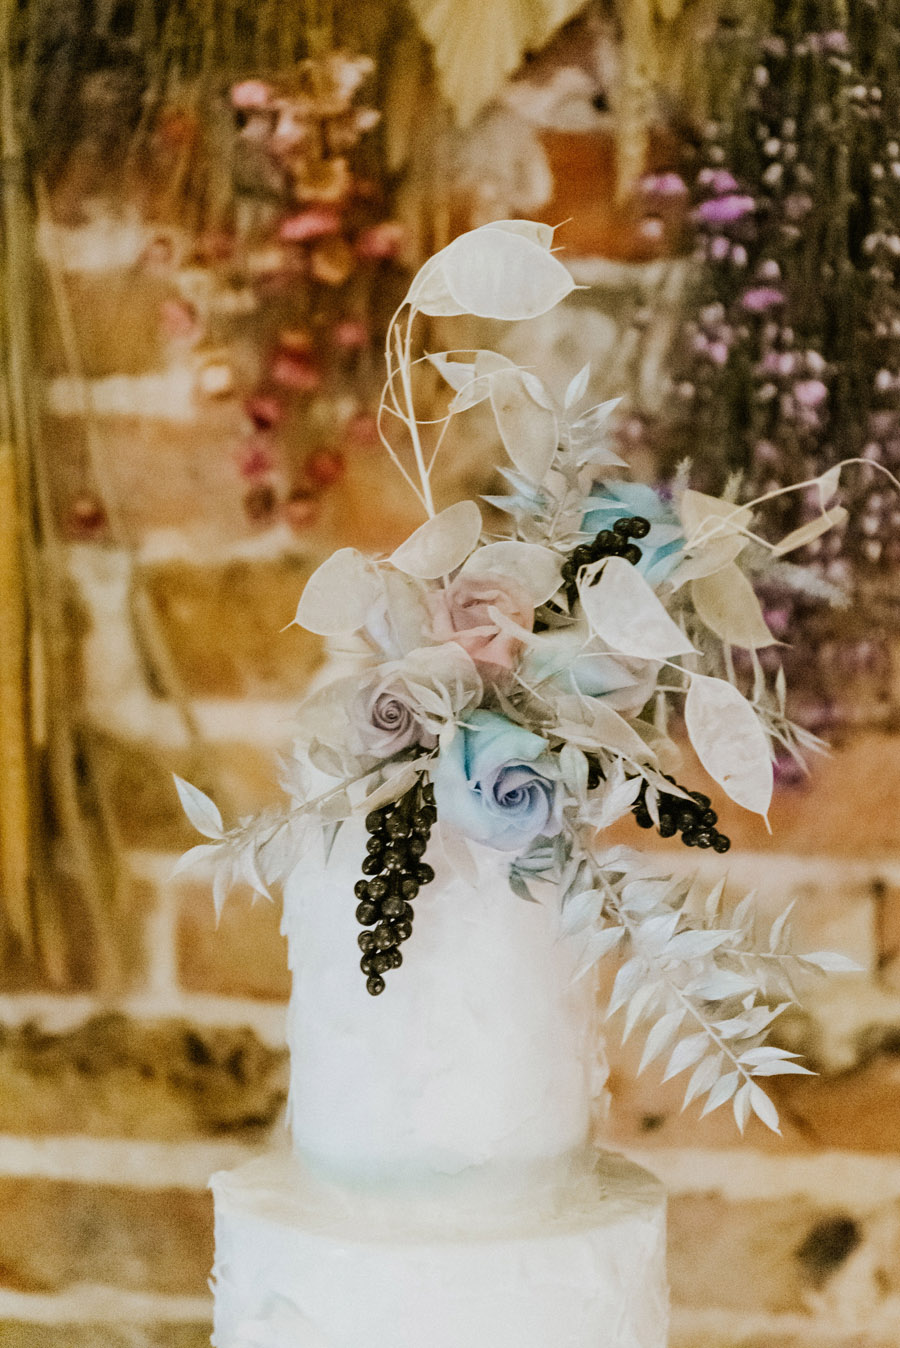 Midelney Manor – Winter pastel romance with a hint of gothic